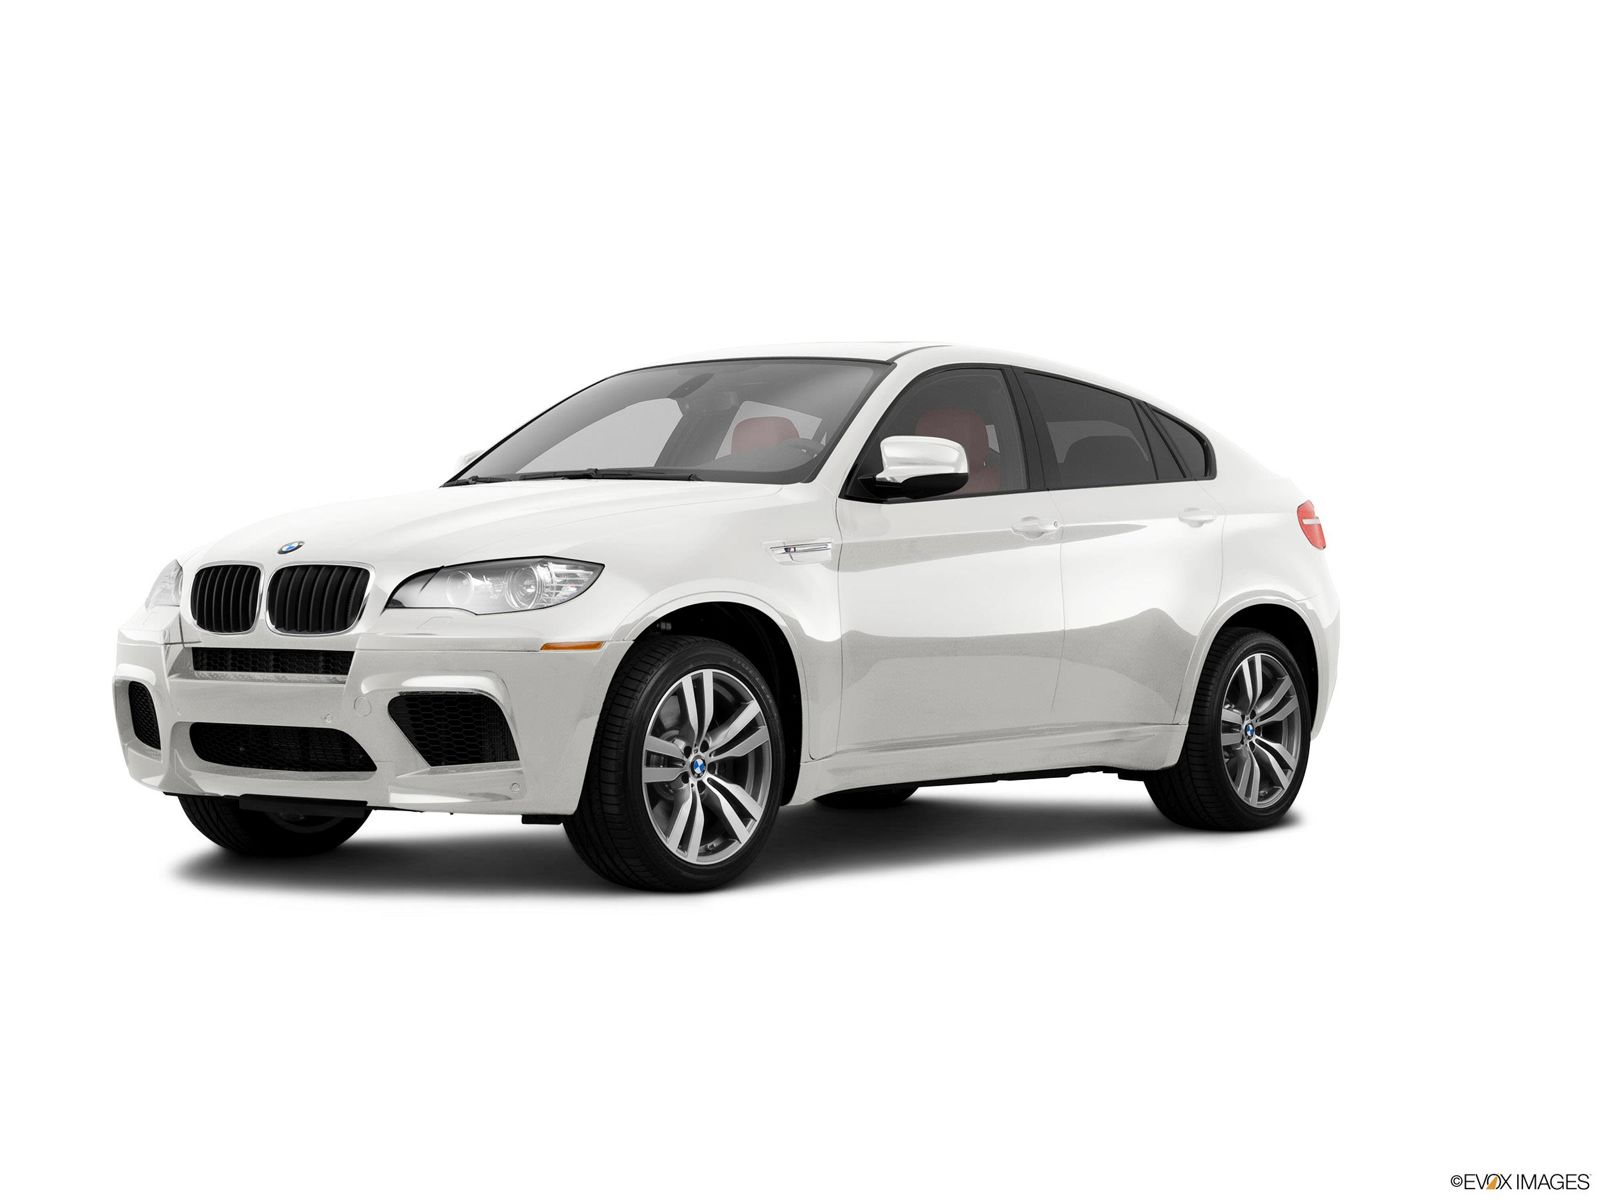 2011 BMW X6 Research, Photos, Specs and Expertise | CarMax